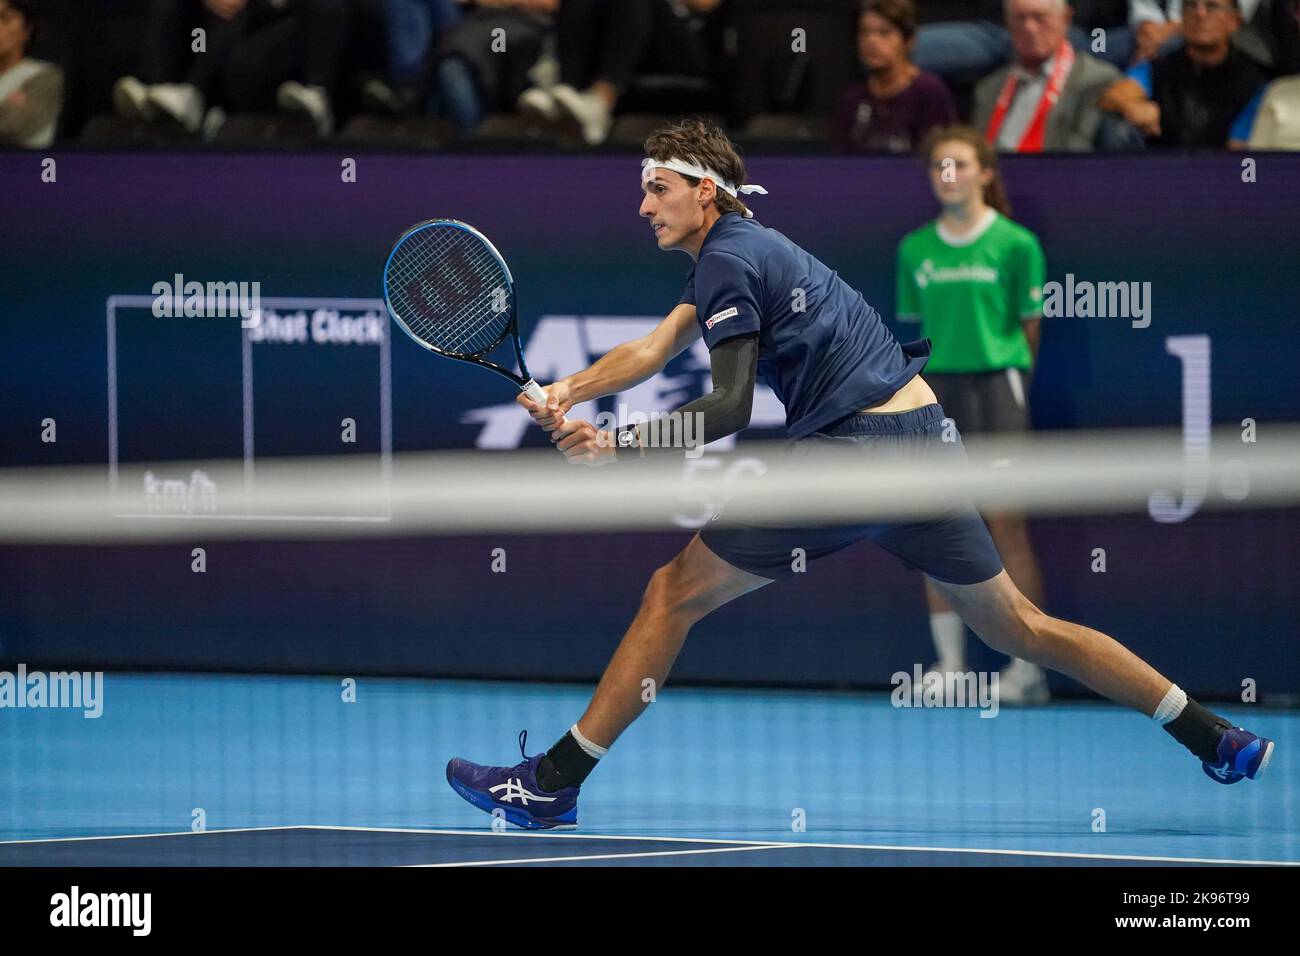 Basel, Switzerland. 26th Oct, 2022. Basel, Switzerland, October 26th 2022:  Marc-Andrea Huesler (SUI) in action during the Swiss Indoors ATP 500 tennis  tournament match between Felix Auger-Aliassime (CAN) and Marc-Andrea  Huesler (SUI)